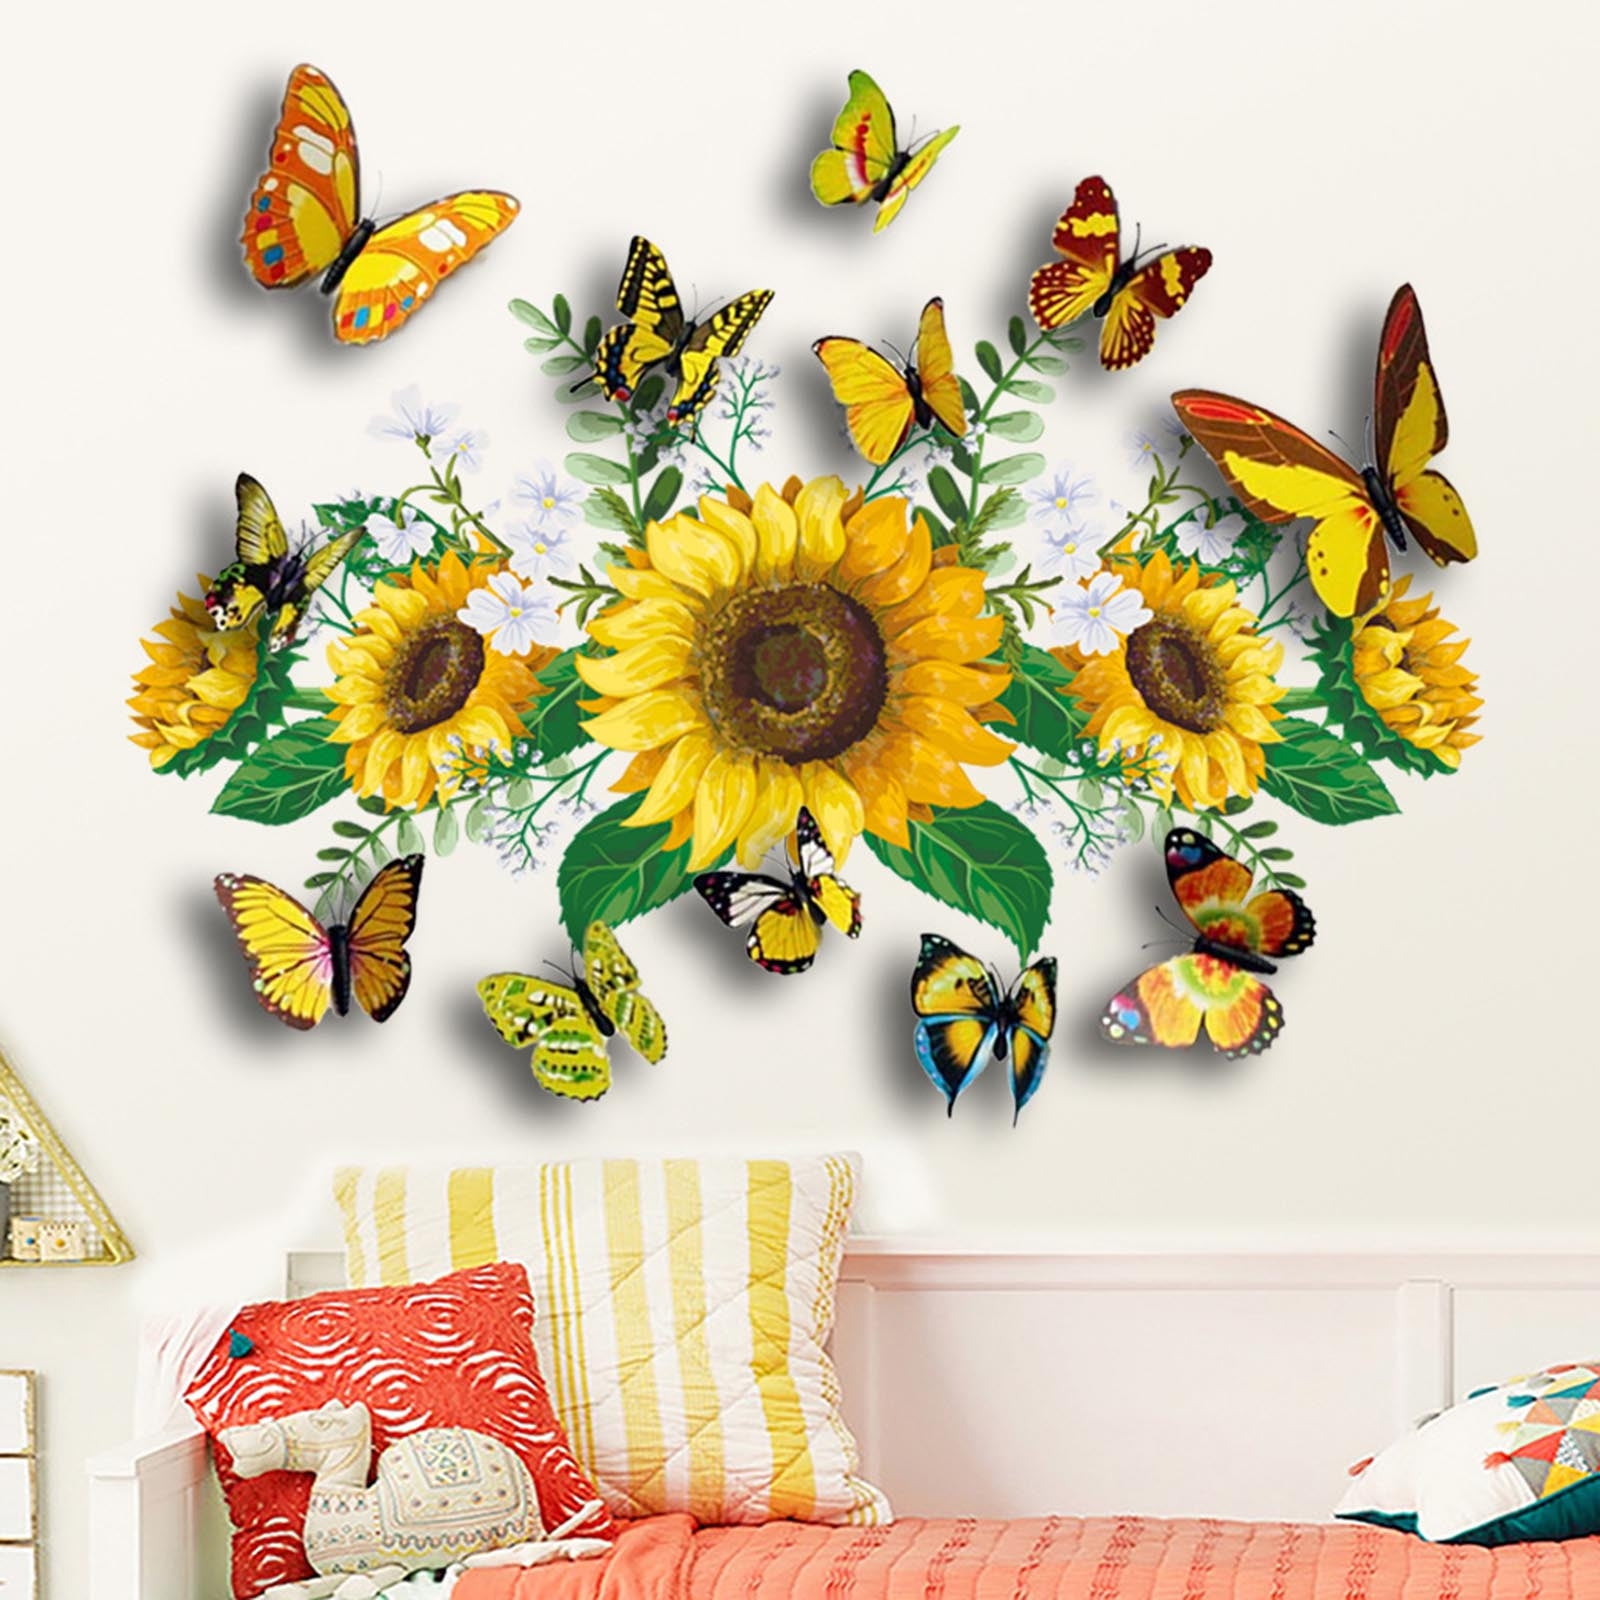 Sunflower Wall Sticker and Butterfly Stickers for Windows Waterproof Removable Decor Stickers DIY for Kids Girls Living Room Bedrooms 27 PCS Sunflower Wall Stickers